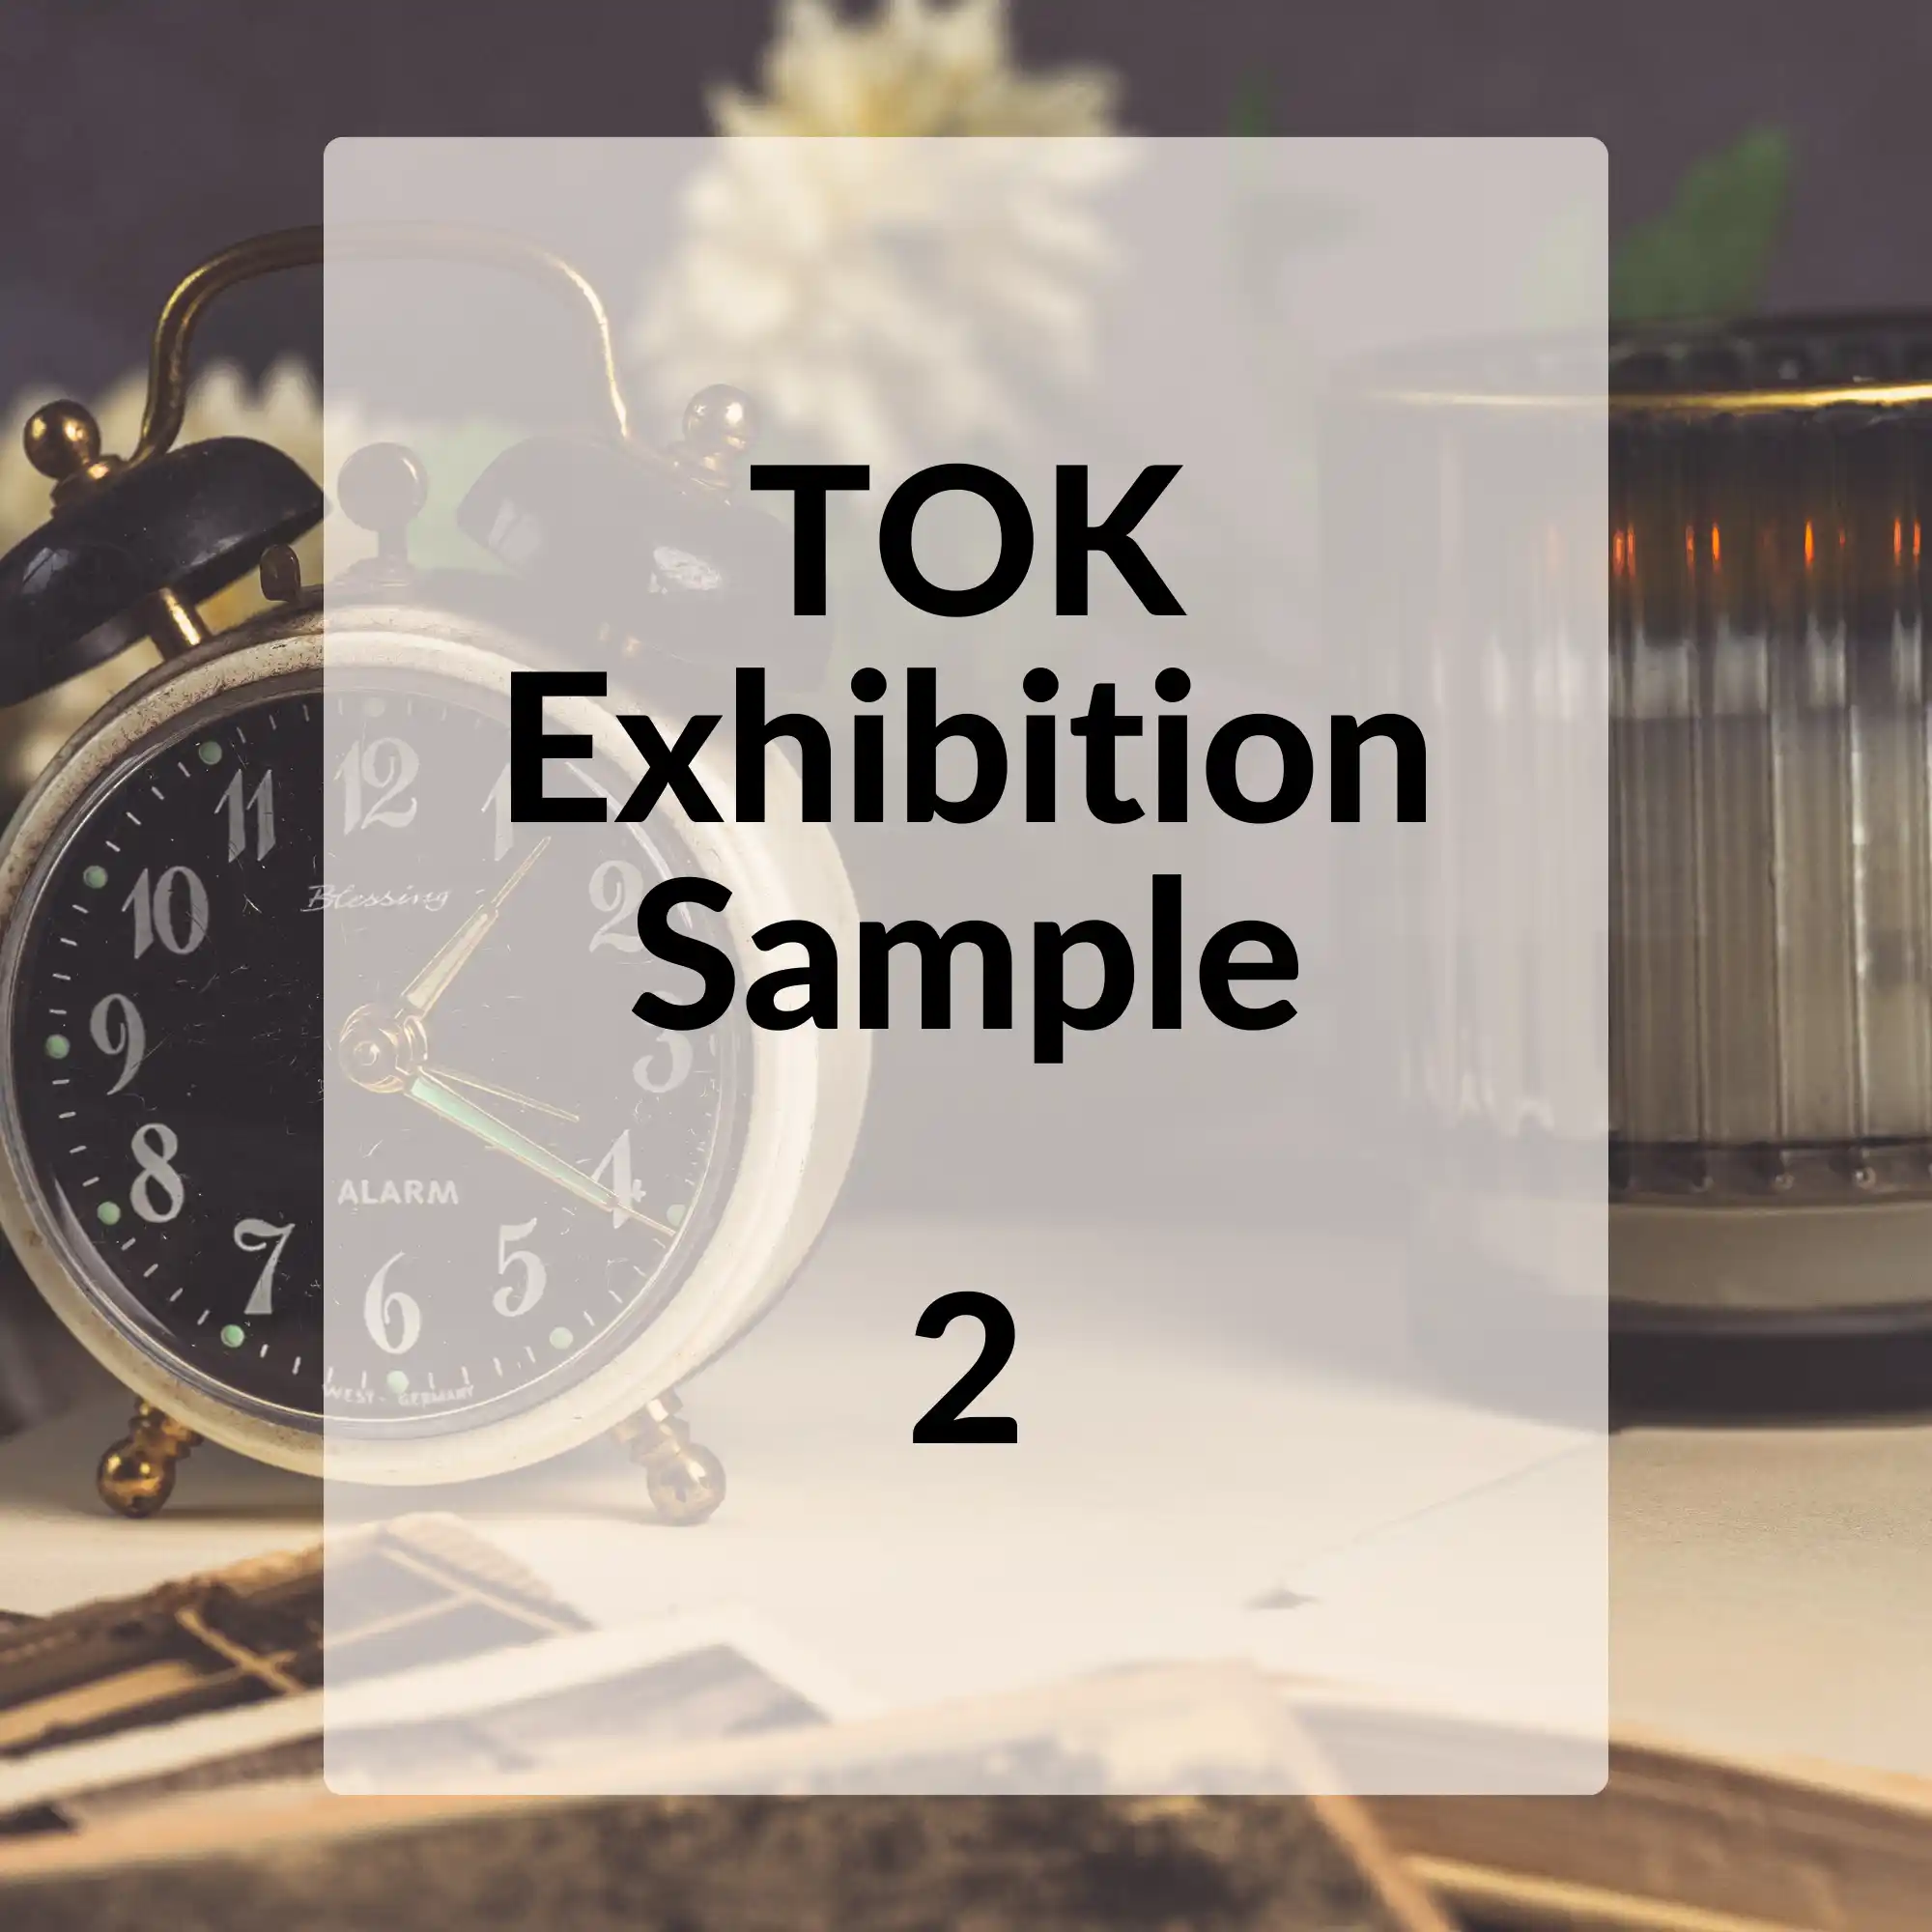 A square image with a blurred background featuring a vintage alarm clock, with a central white rectangle that reads "TOK Exhibition Sample 2" in black font and the number "2" prominently displayed at the bottom.